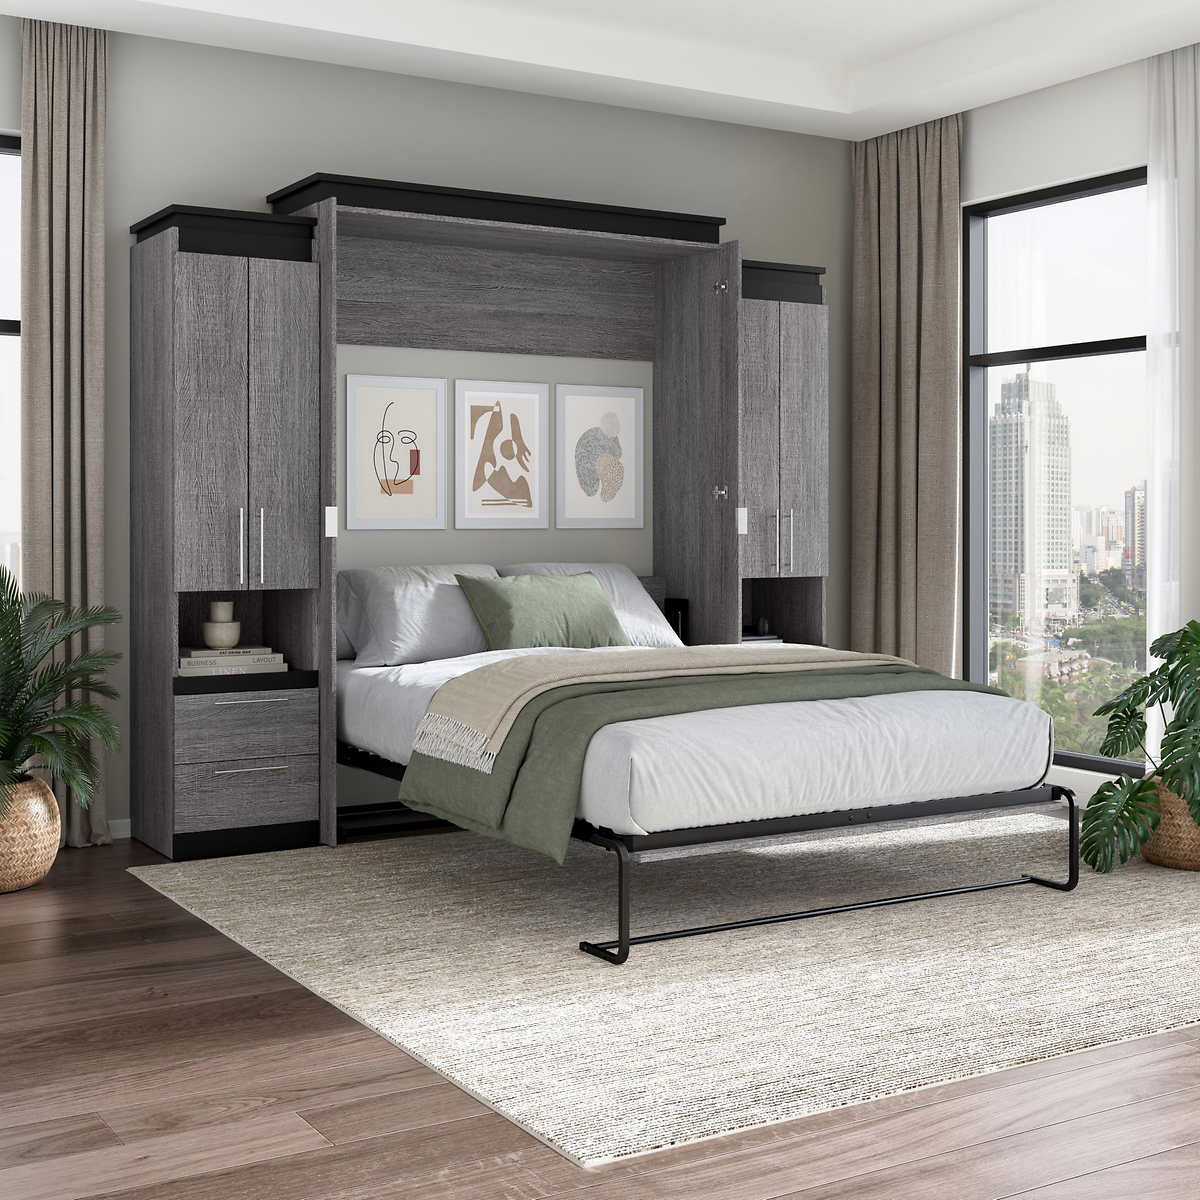 Bestar Orion 3-piece Queen Wall Bed with Storage Cabinets and Pull